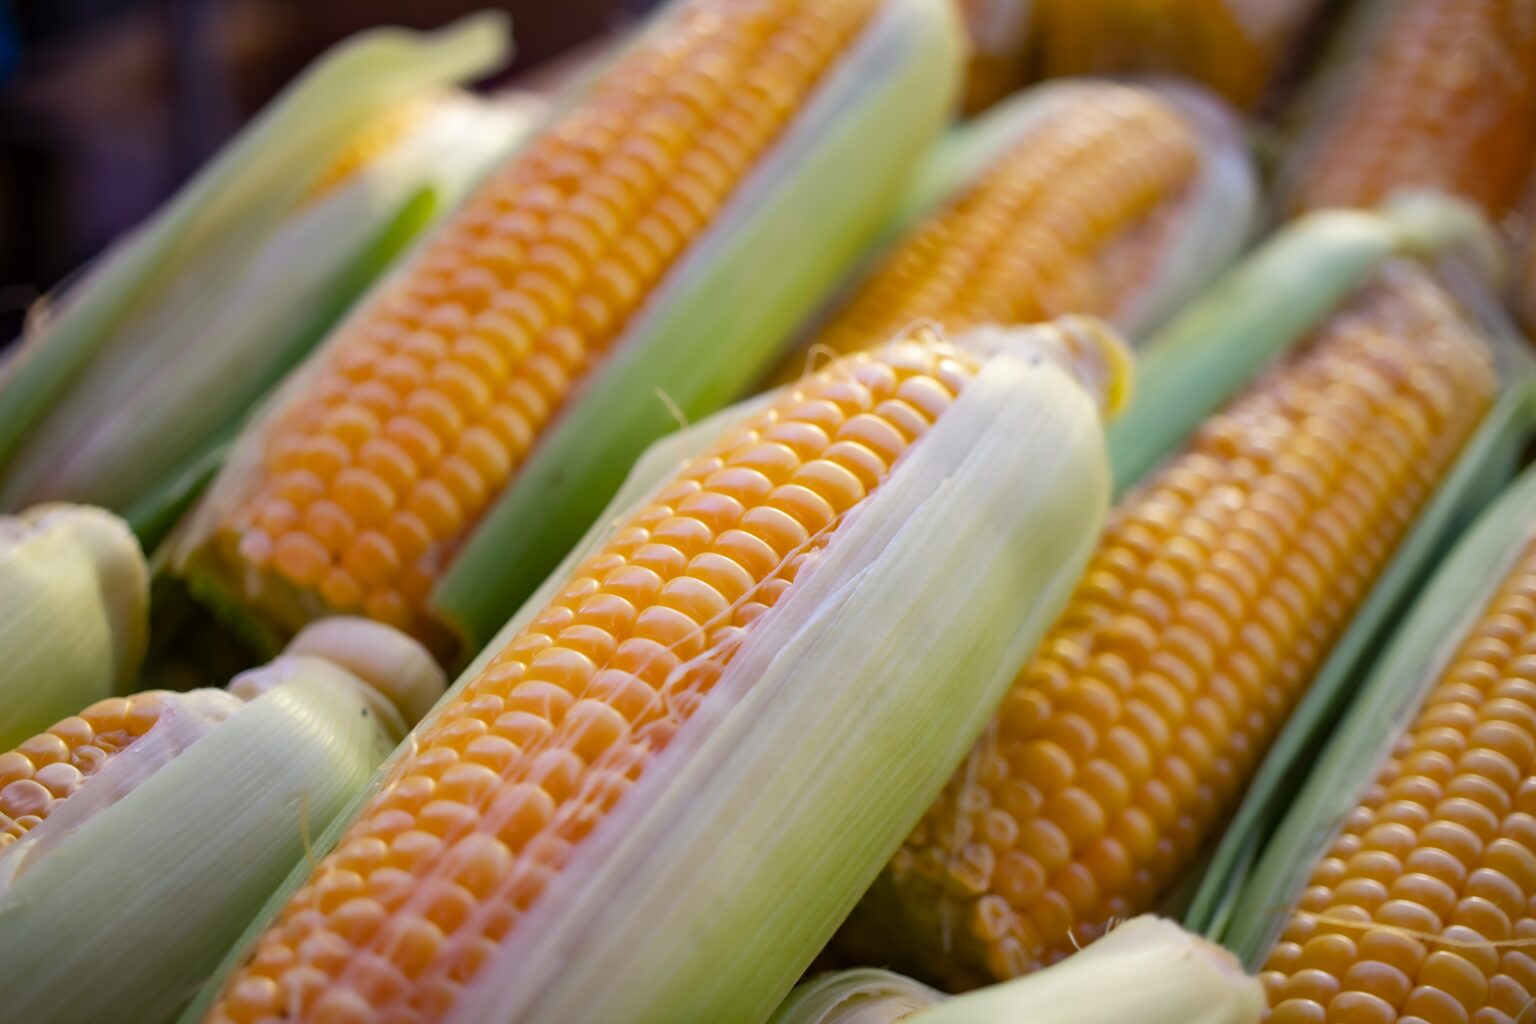 THE CONTROVERSY WITH TRANSGENIC CORN CONTINUES